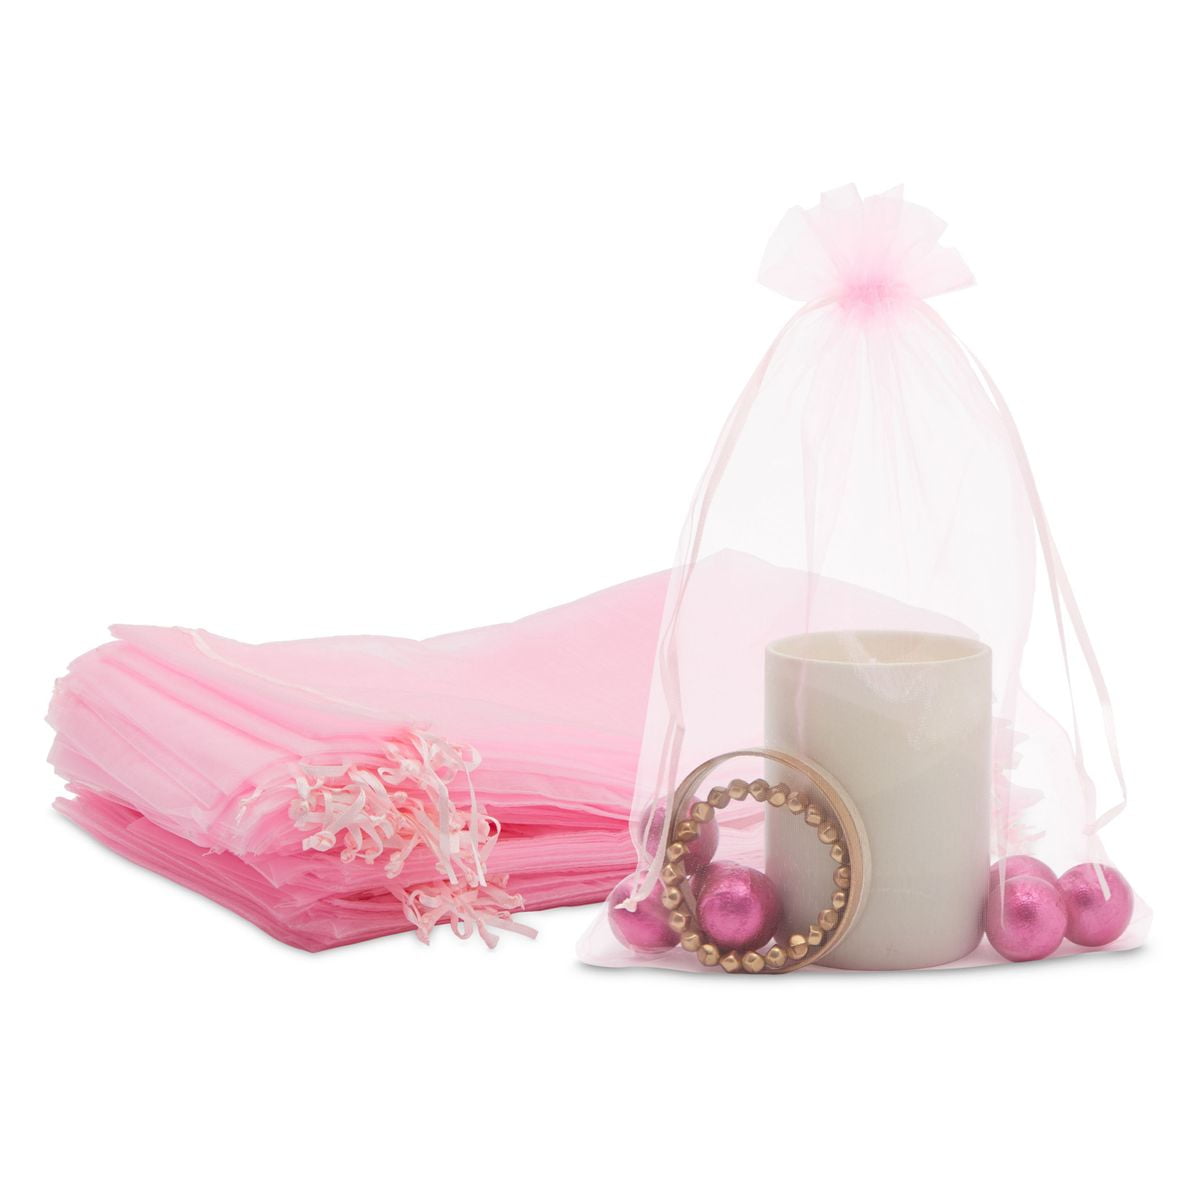 100 Pink & White Stripe Candy/Sweet Bags 5x7 Prime Brand 